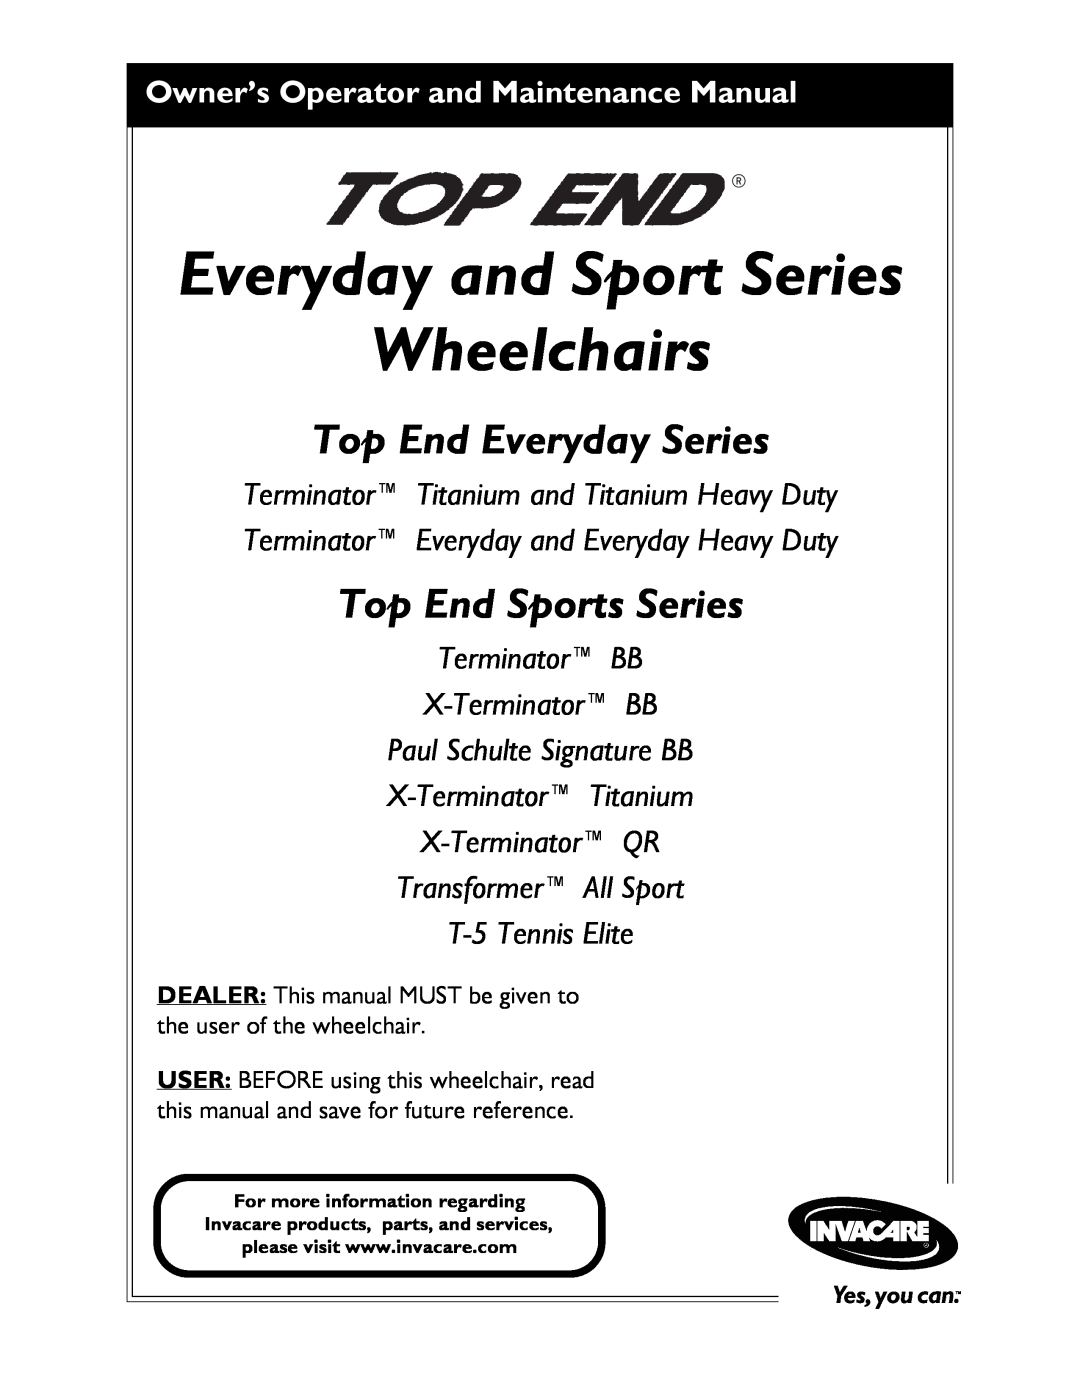 Invacare X-Terminator QR manual Everyday and Sport Series Wheelchairs, Top End Everyday Series, Top End Sports Series 